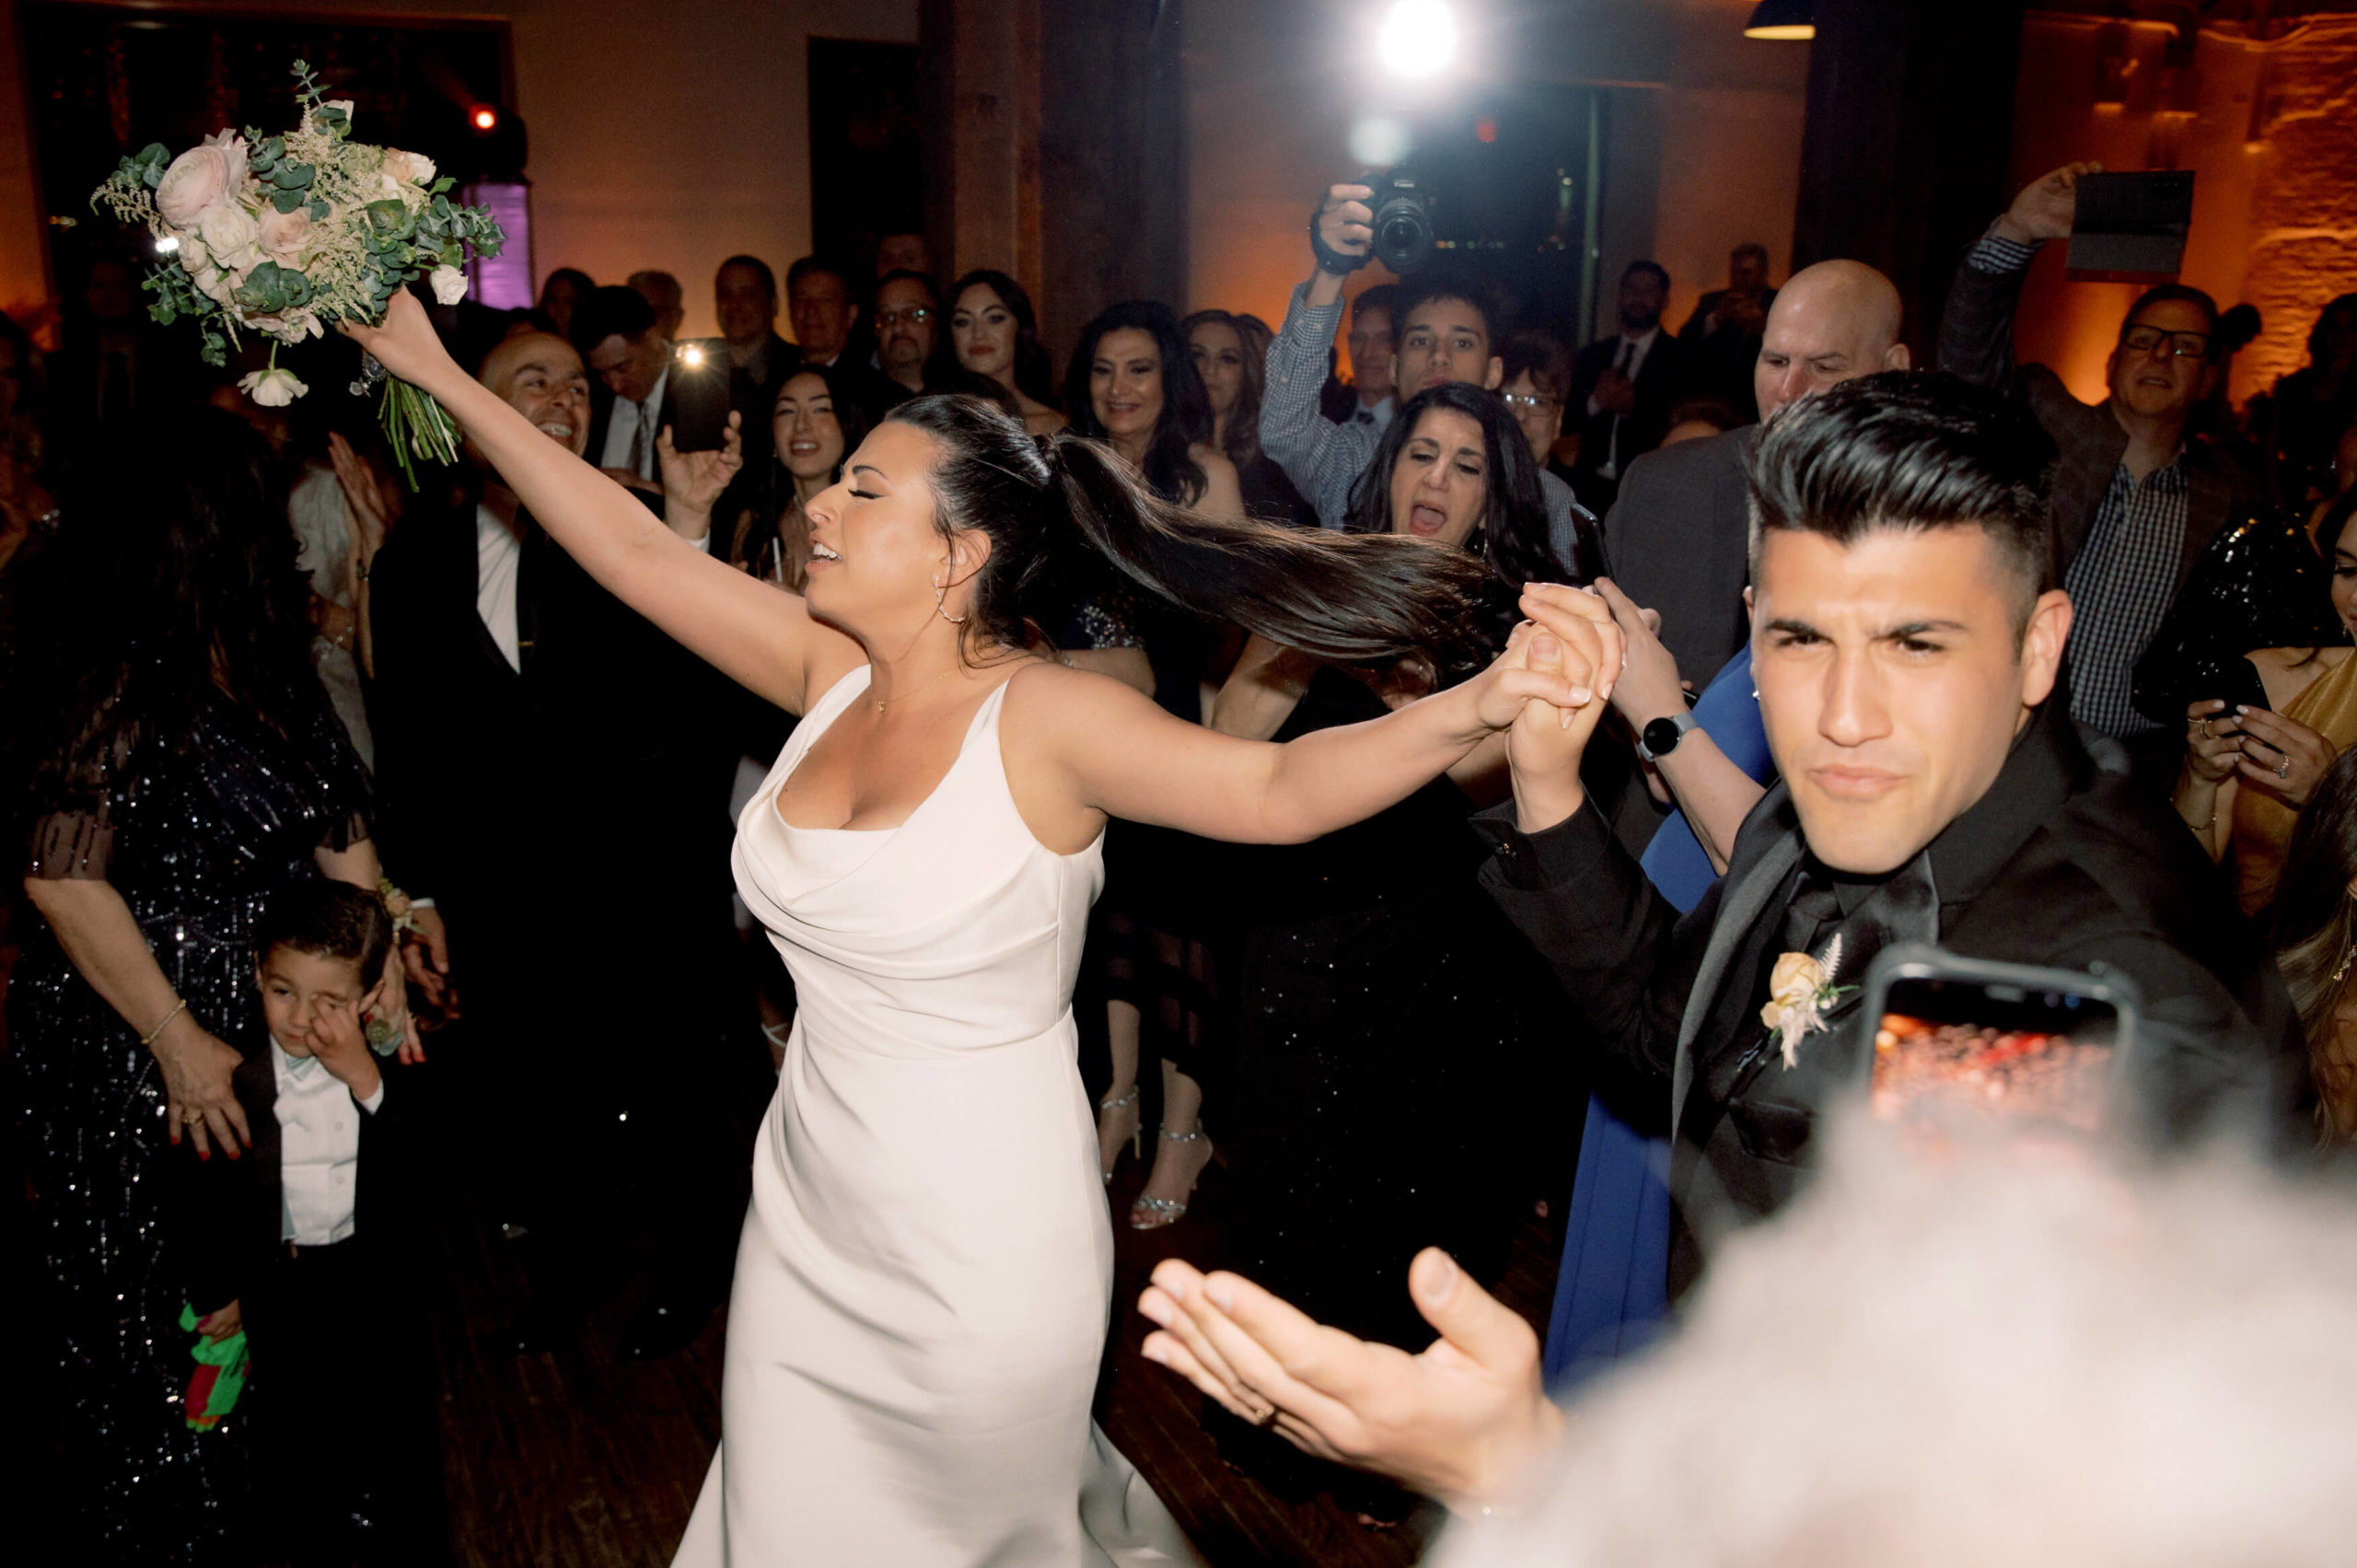 The newlyweds are dancing while the guests cheer on. Image by Jenny Fu Studio